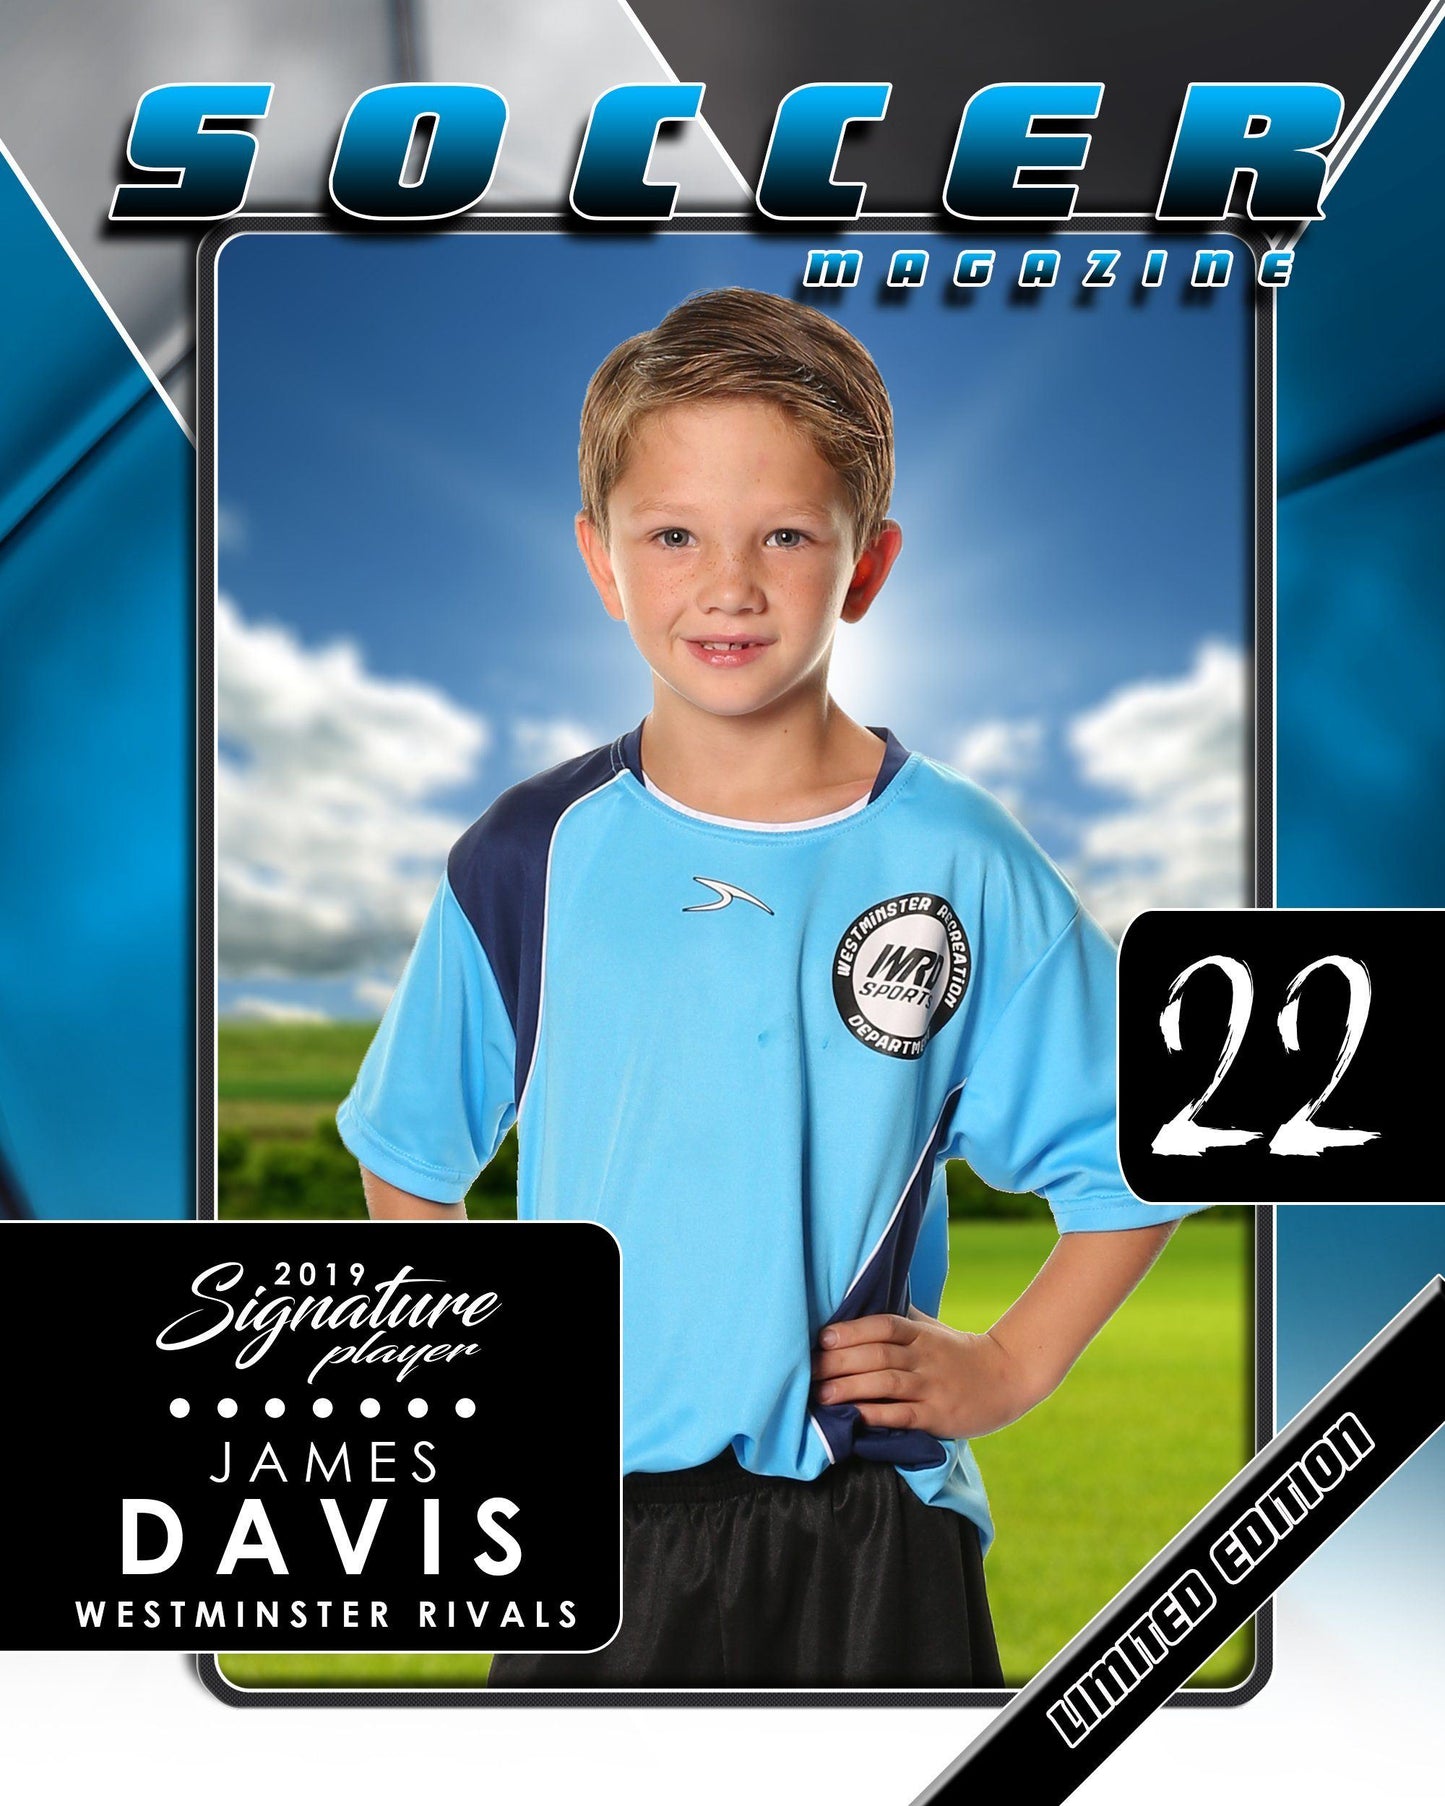 Signature Player - Soccer - V2 - T&I Drop-In Collection-Photoshop Template - Photo Solutions